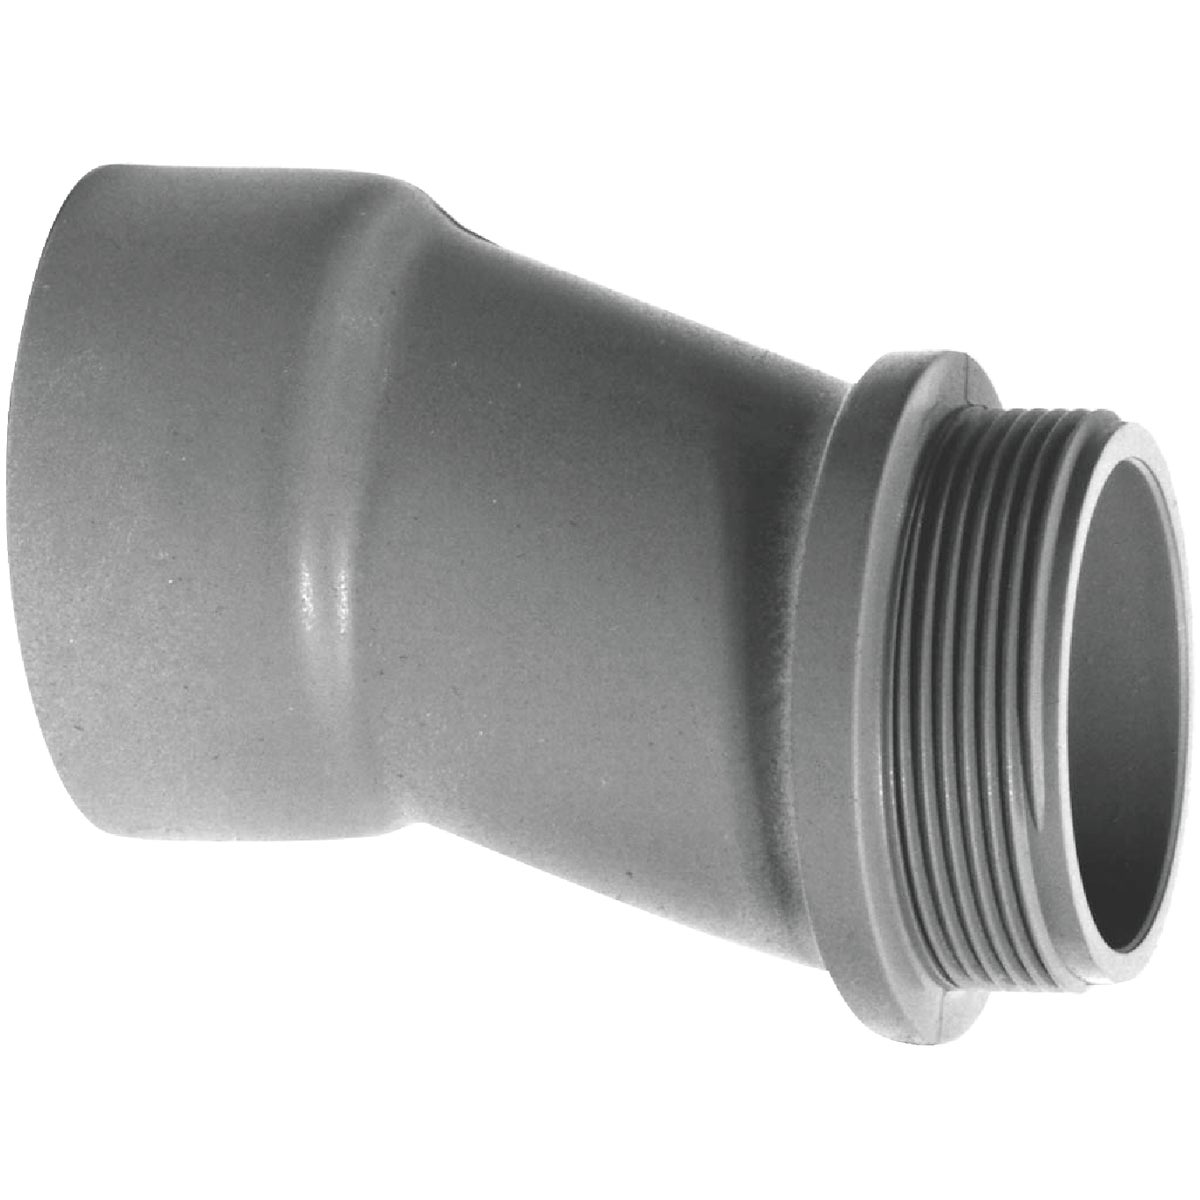 Carlon 2 In. PVC Offset Meter Connector